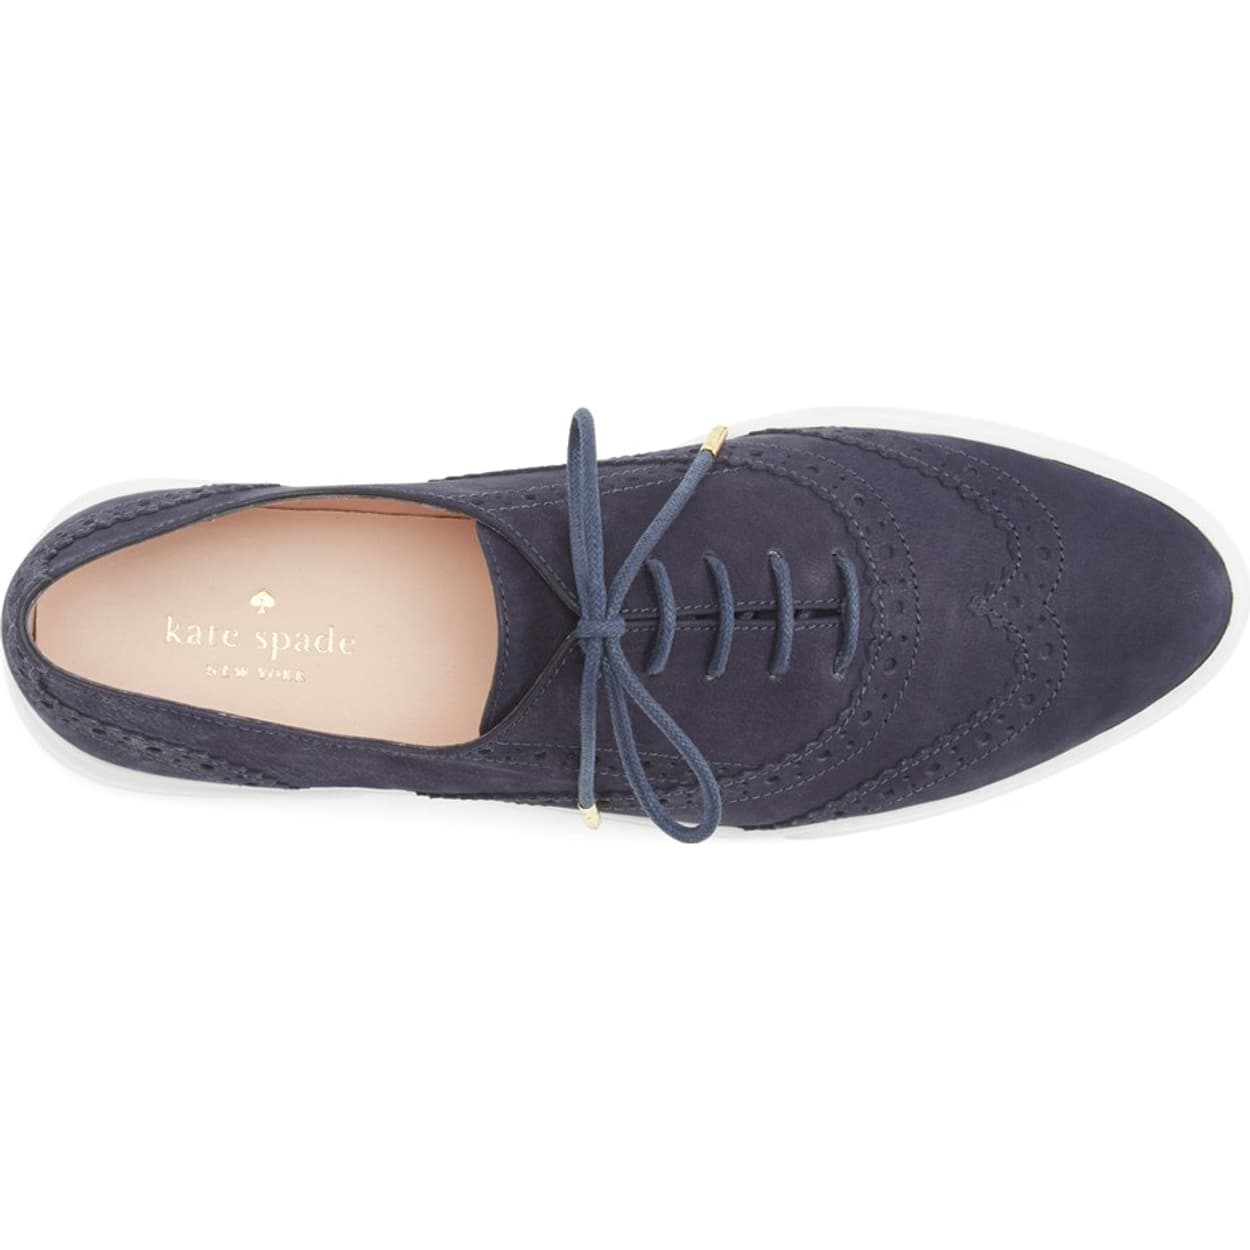 Kate Spade New York Womens Catlyn Suede Oxford Shoes